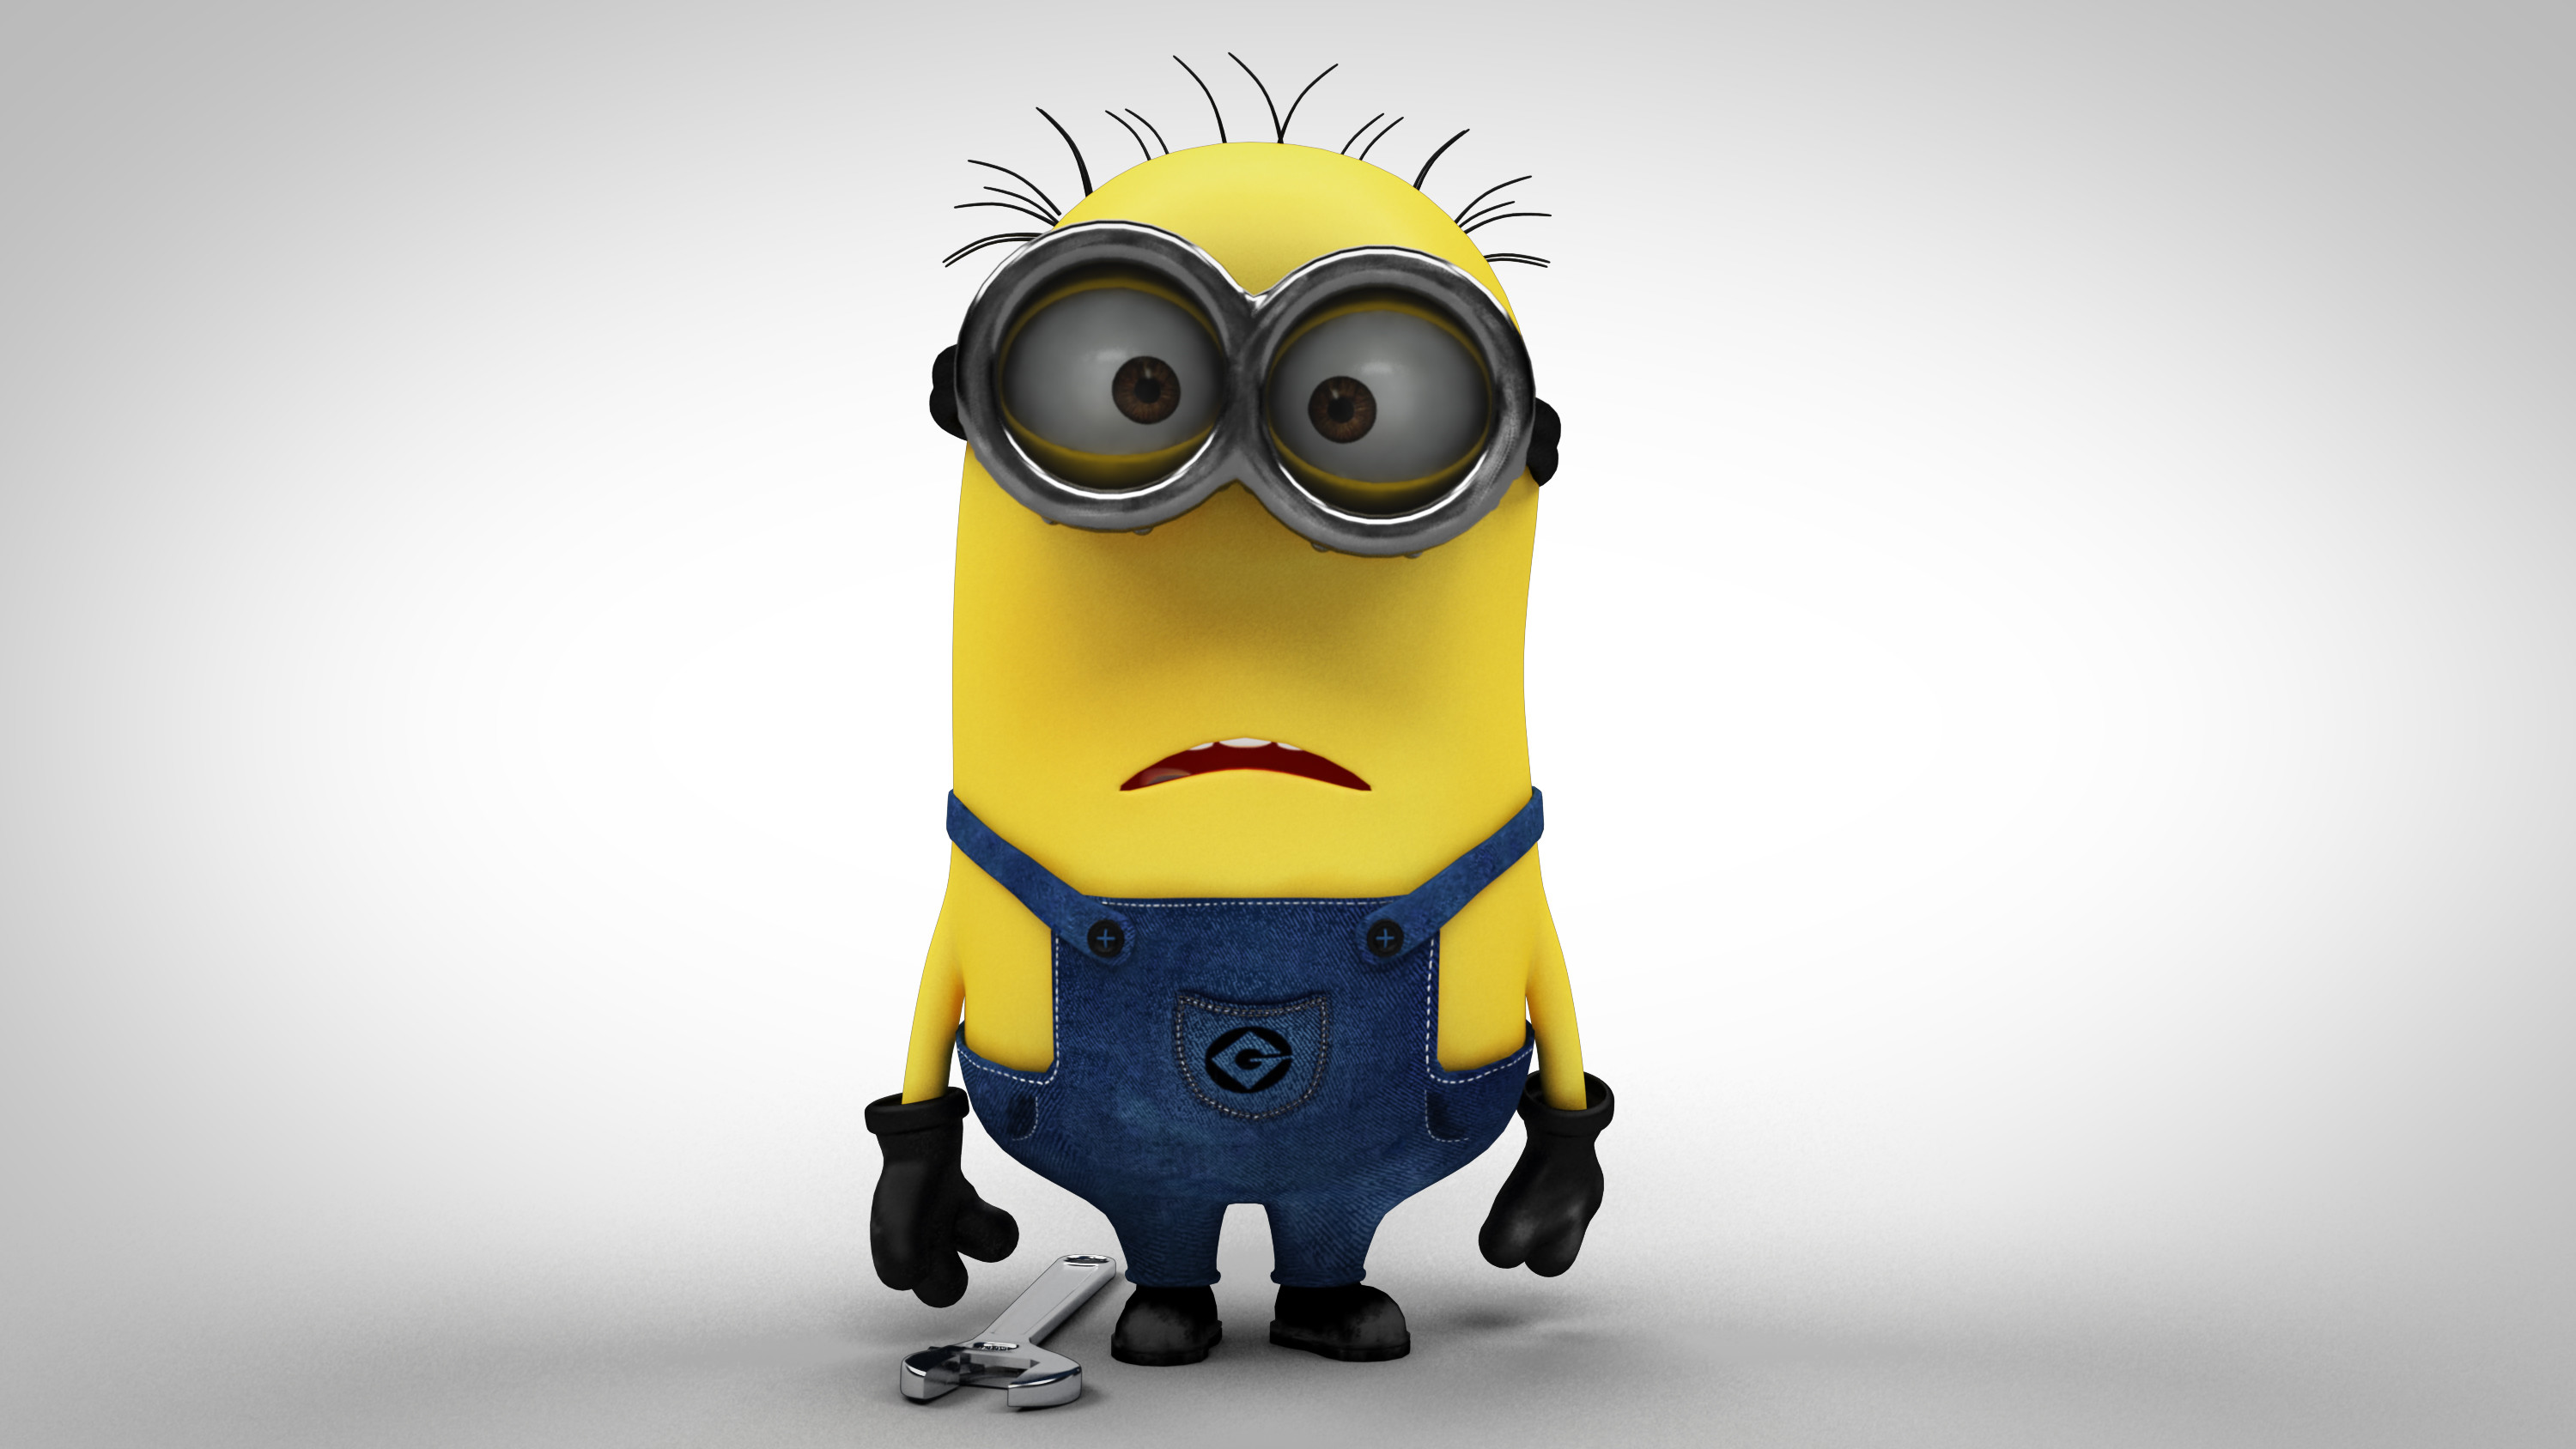 3000x1688 Despicable Me Minion by Rofhiwa on DeviantArt